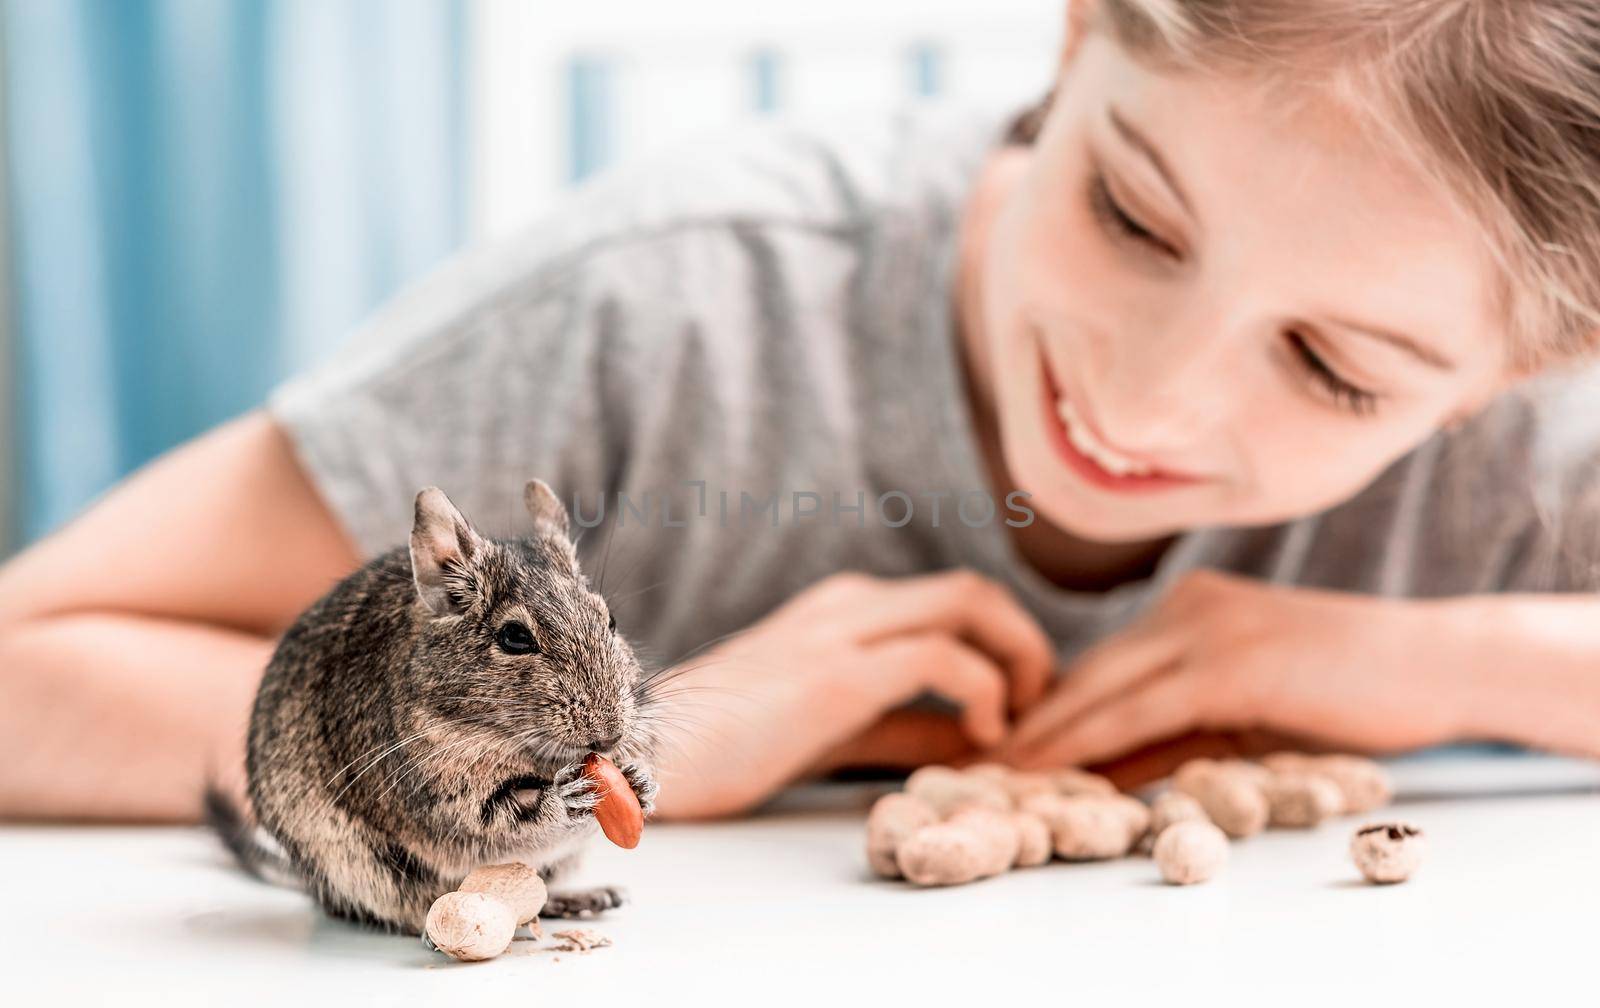 Young girl observe the degu squirrel by GekaSkr